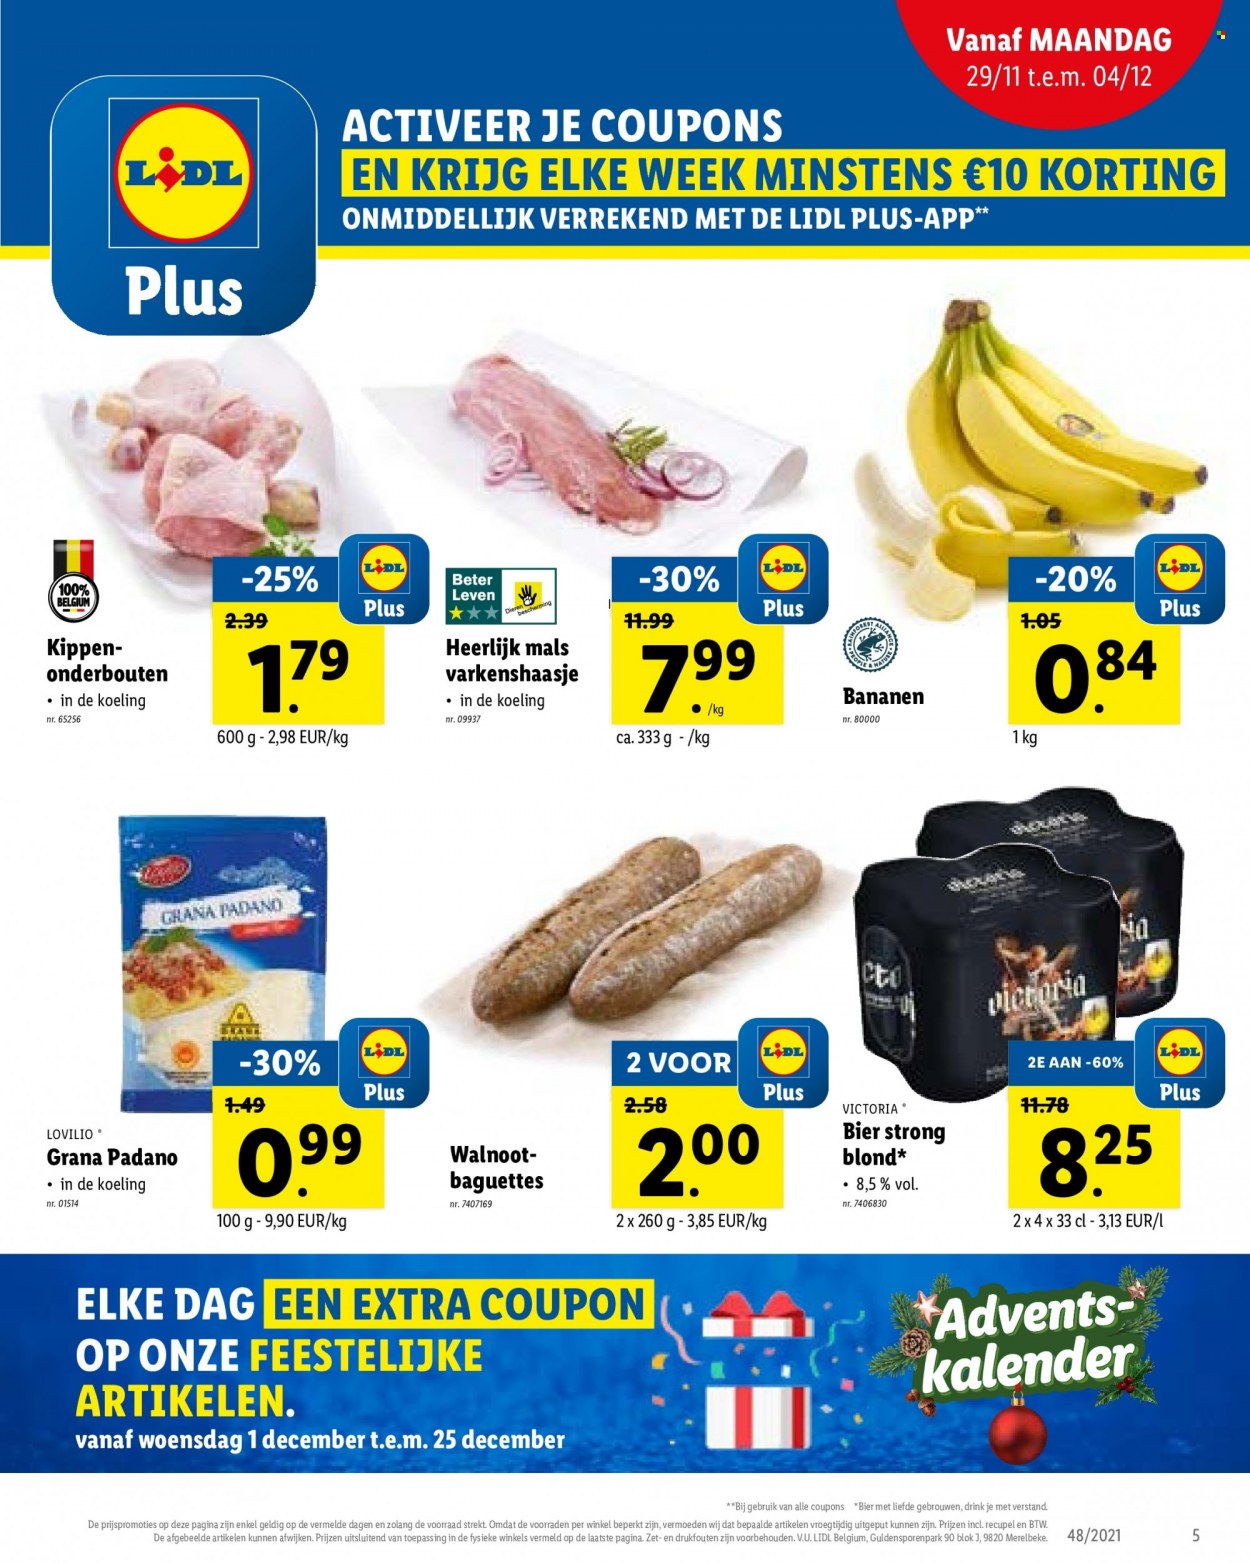 Catalogue Lidl - 29.11.2021 - 4.12.2021. Page 5.